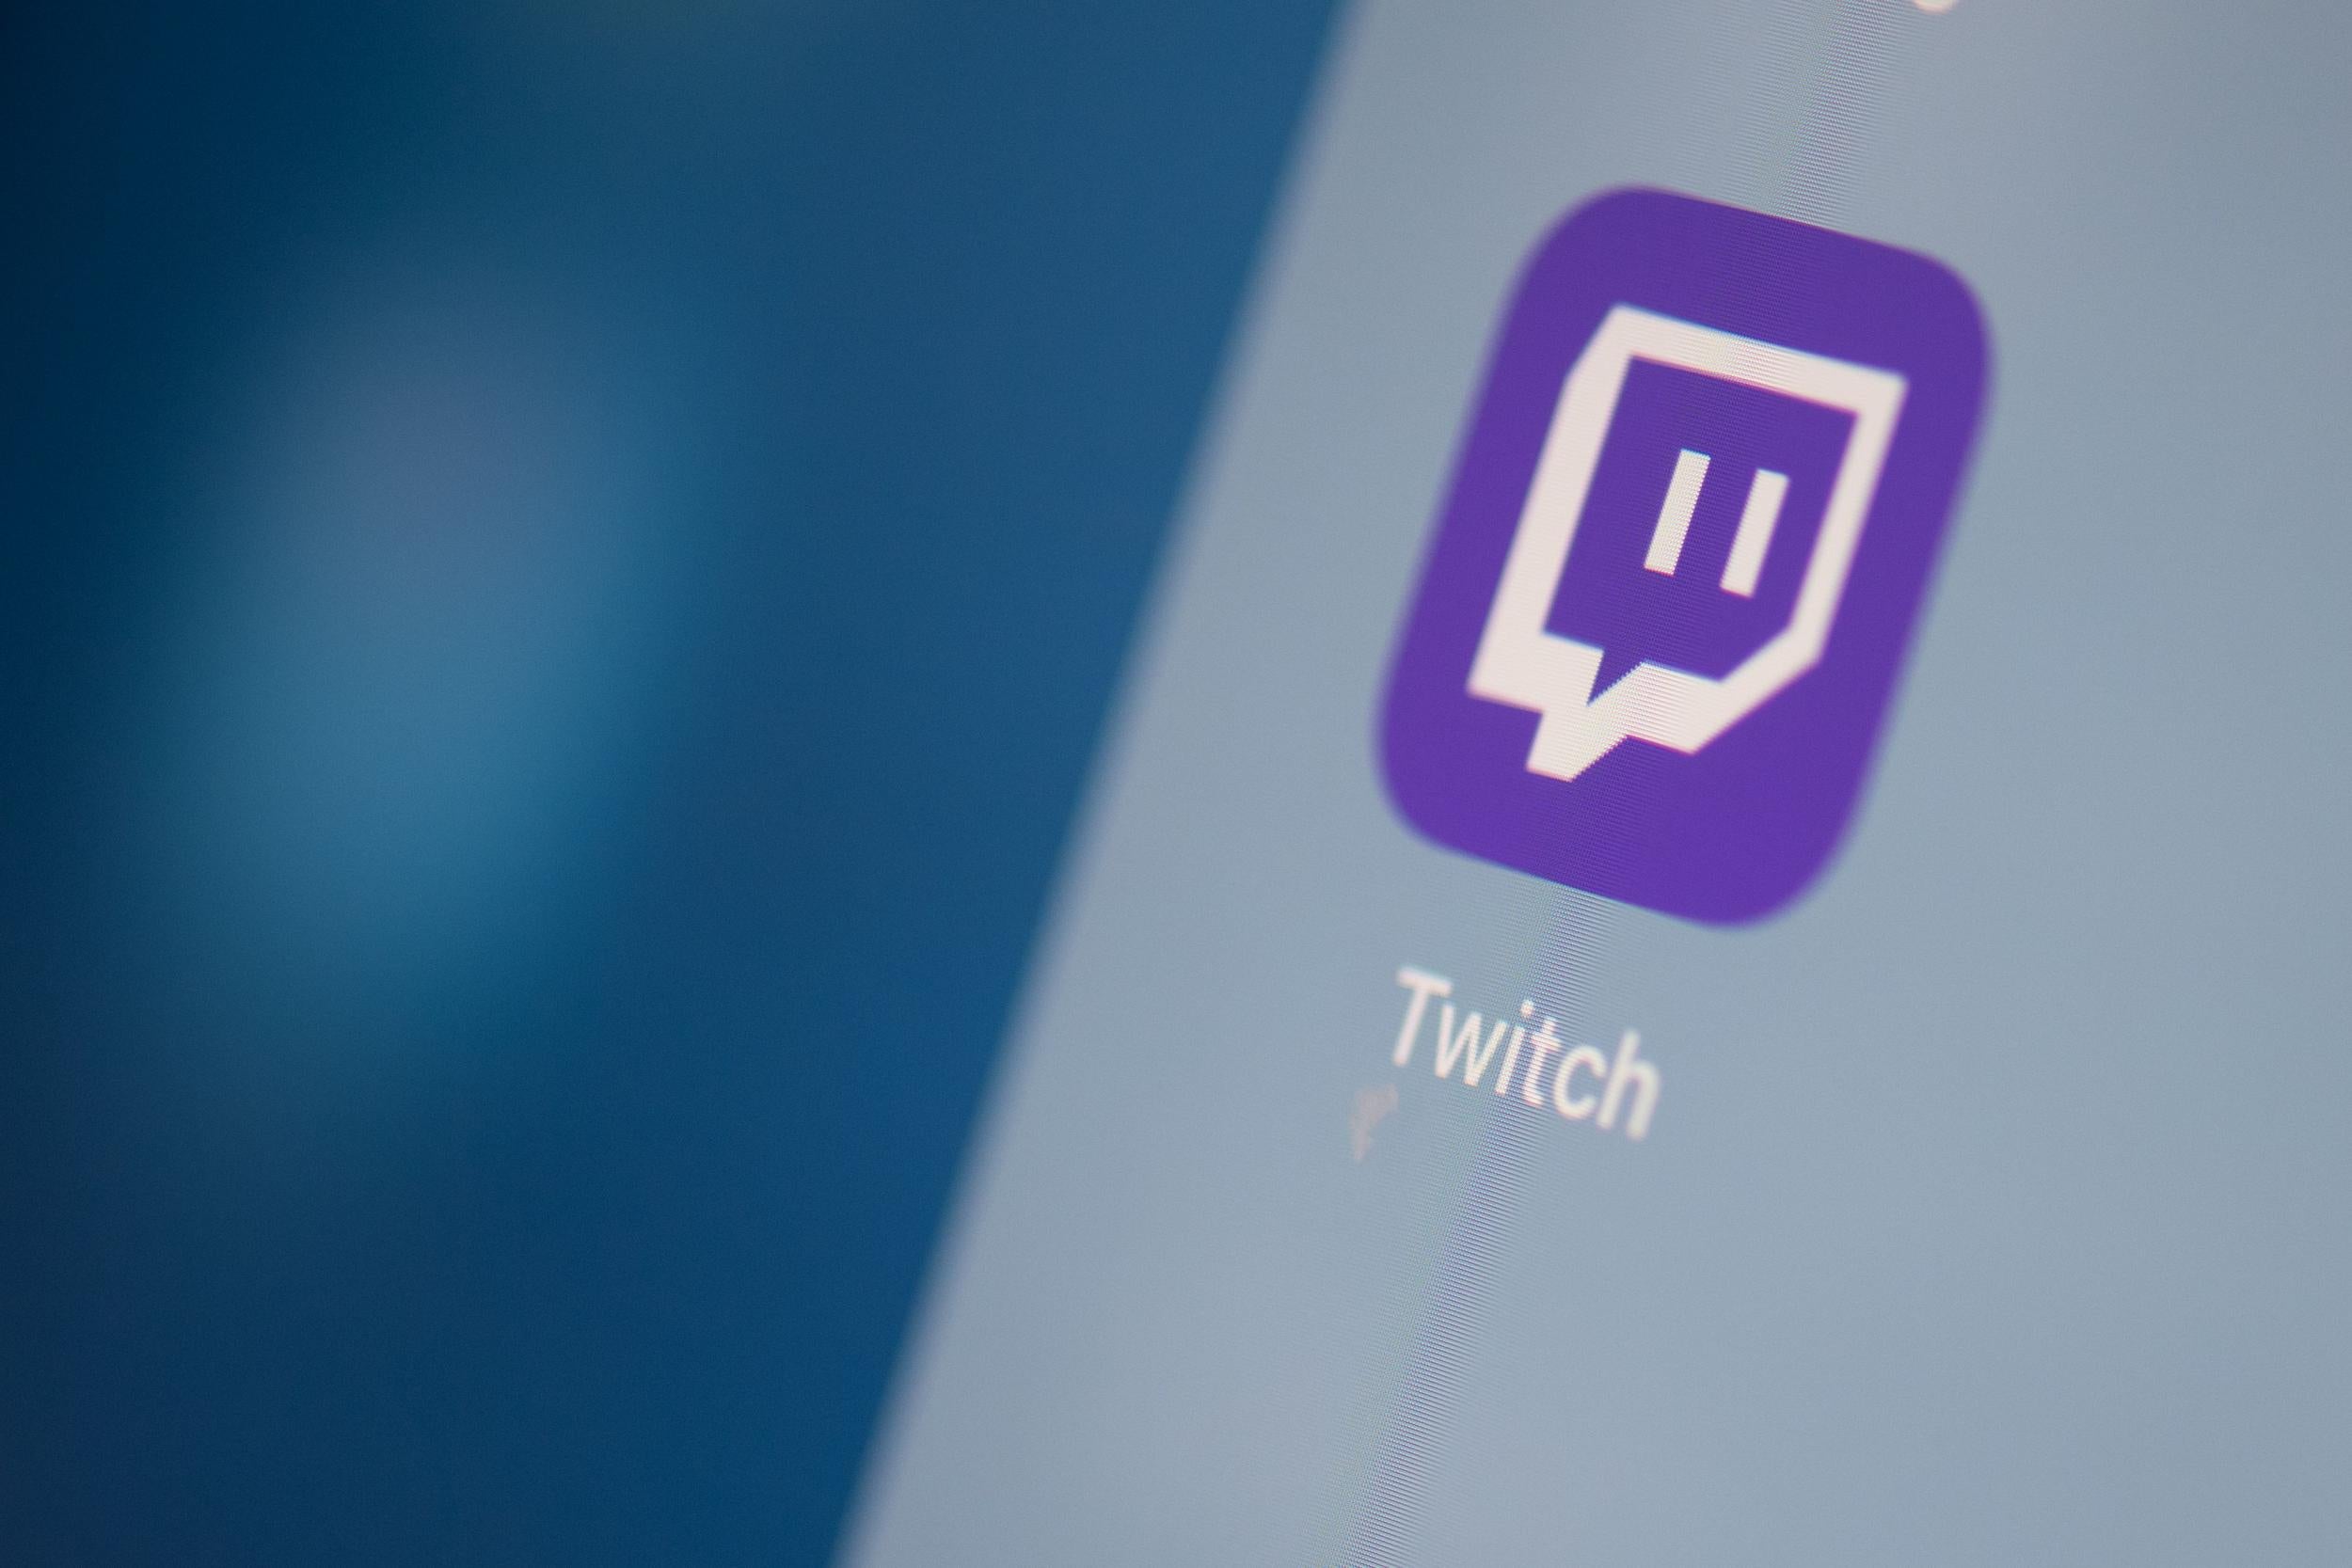 This illustration picture taken on July 24, 2019 in Paris shows the US live streaming video platform Twitch logo application on the screen of a tablet